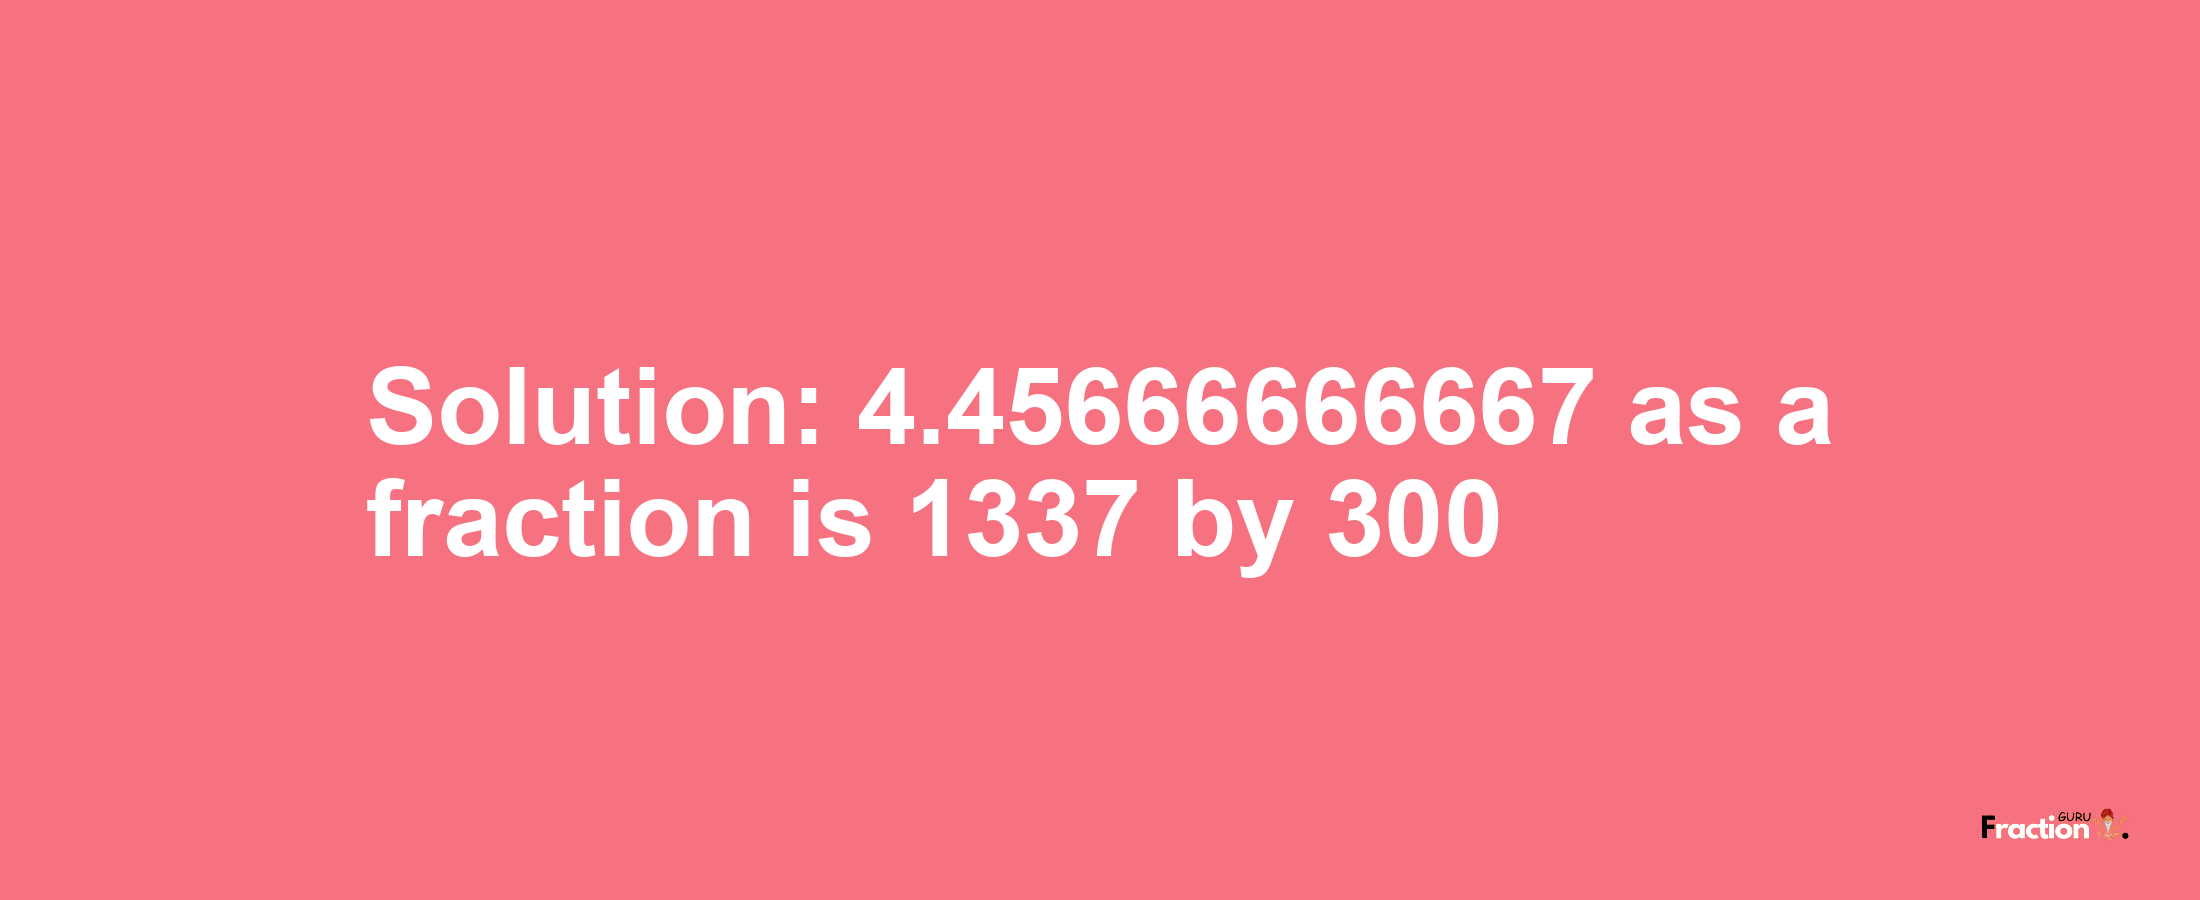 Solution:4.45666666667 as a fraction is 1337/300